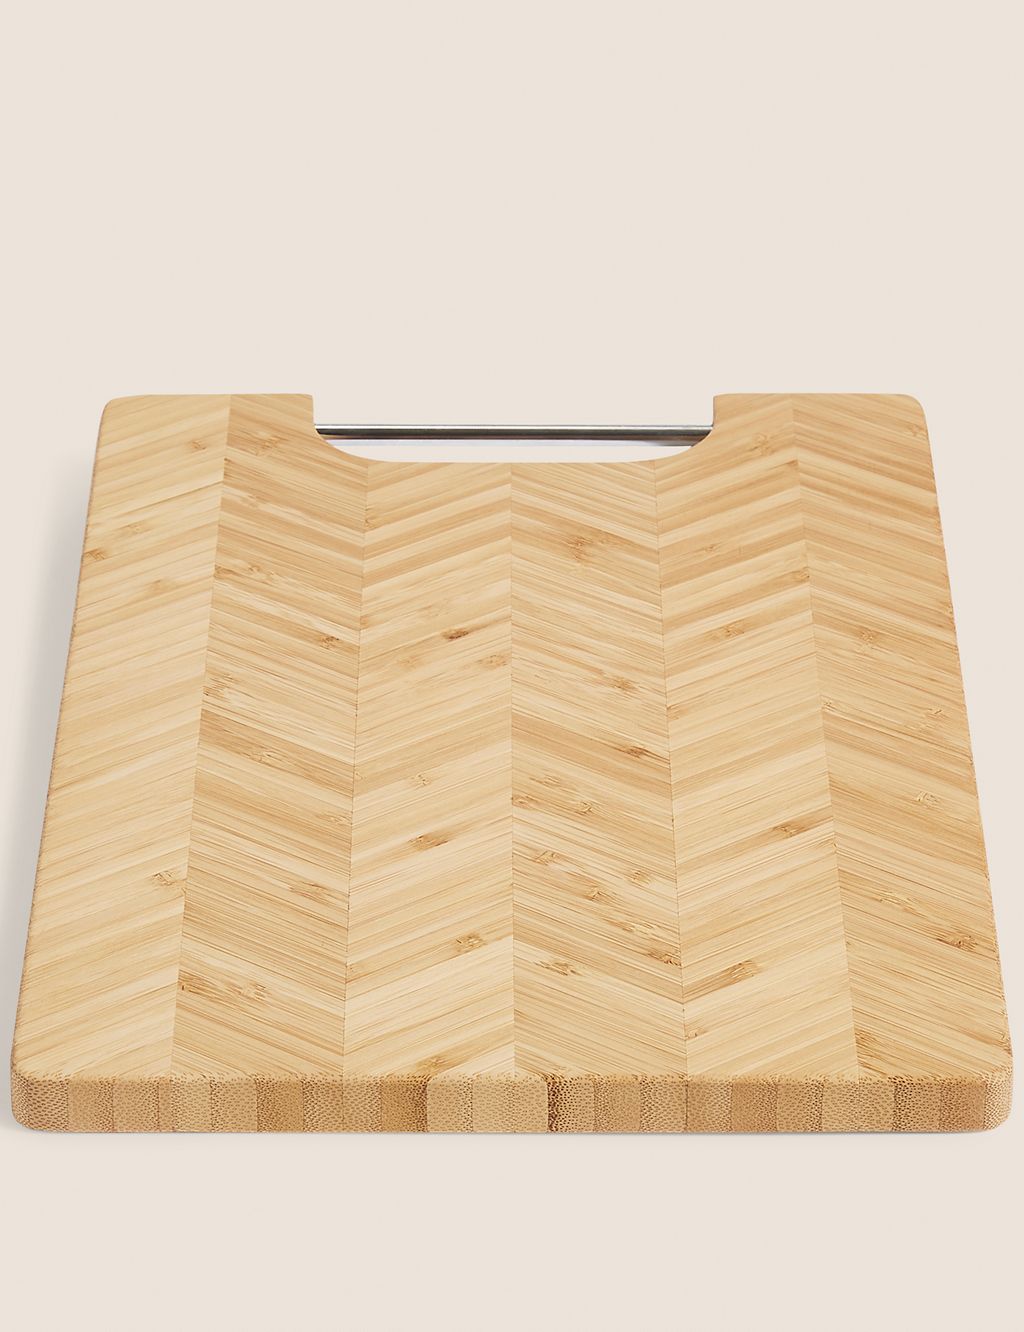 Large Wooden Chopping Board 1 of 5